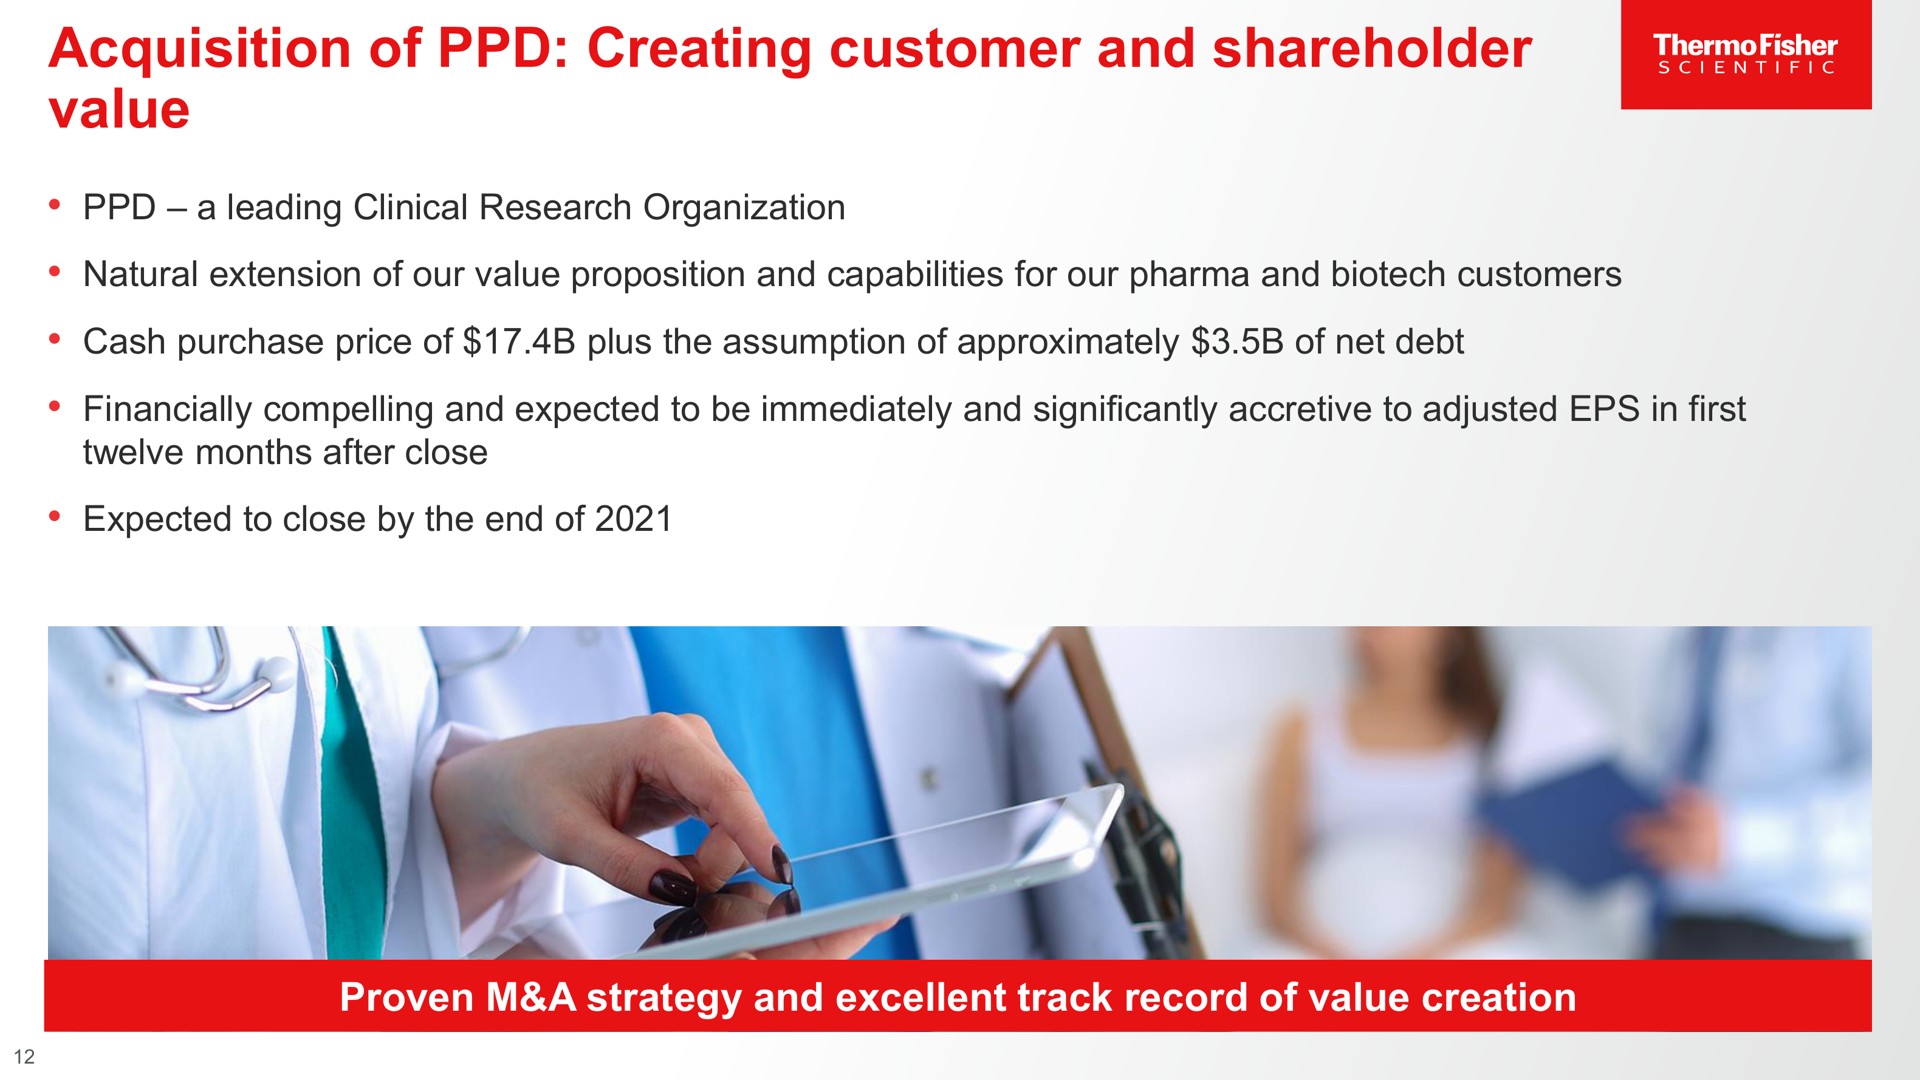 acquisition of creating customer and shareholder value | Thermo Fisher